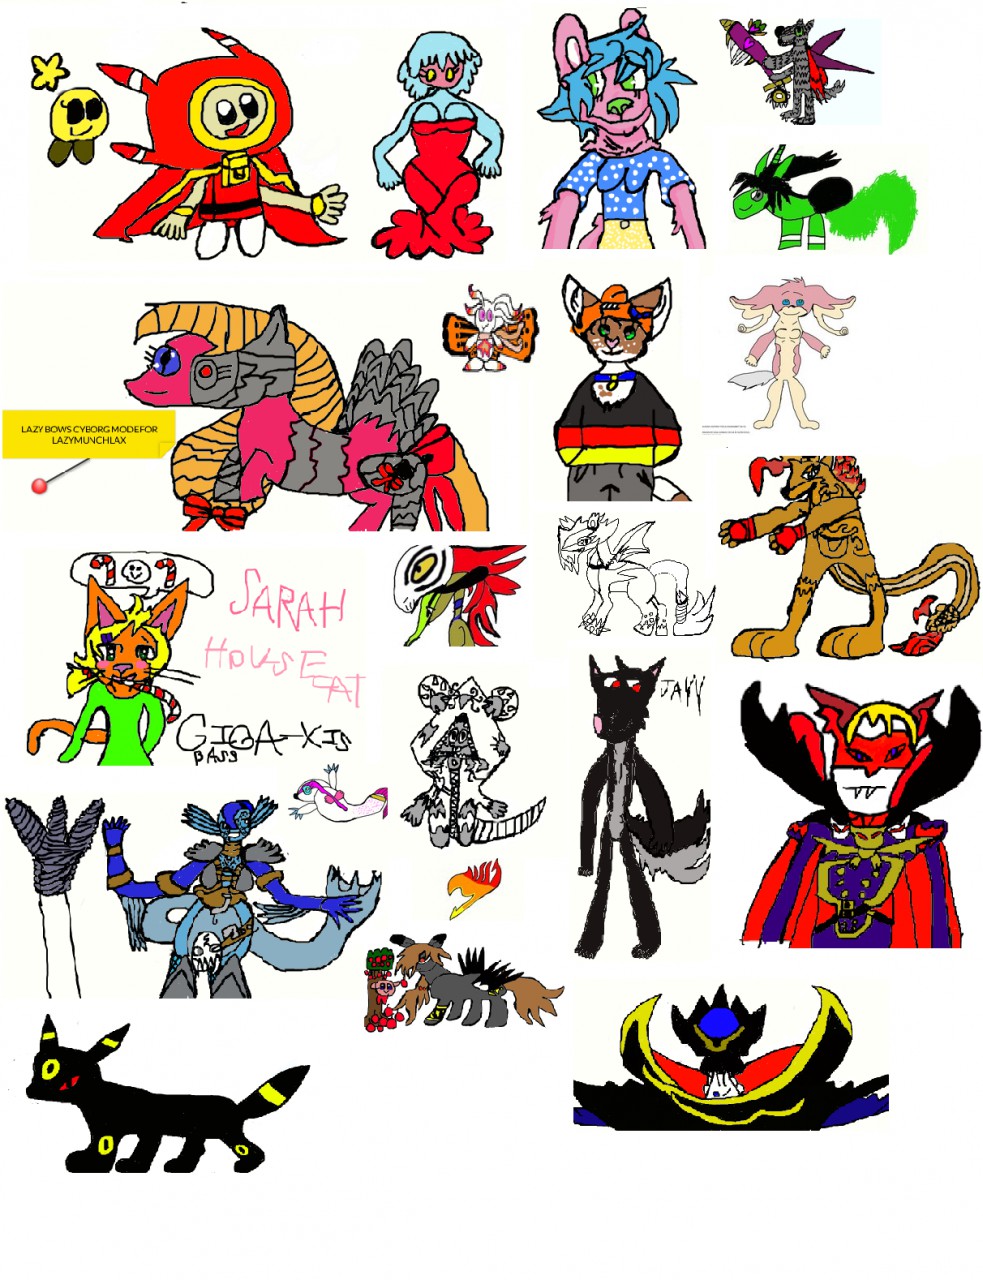 1405446781.giga-xisbass_collection_of_some_of_my_best_drawings_yet.png